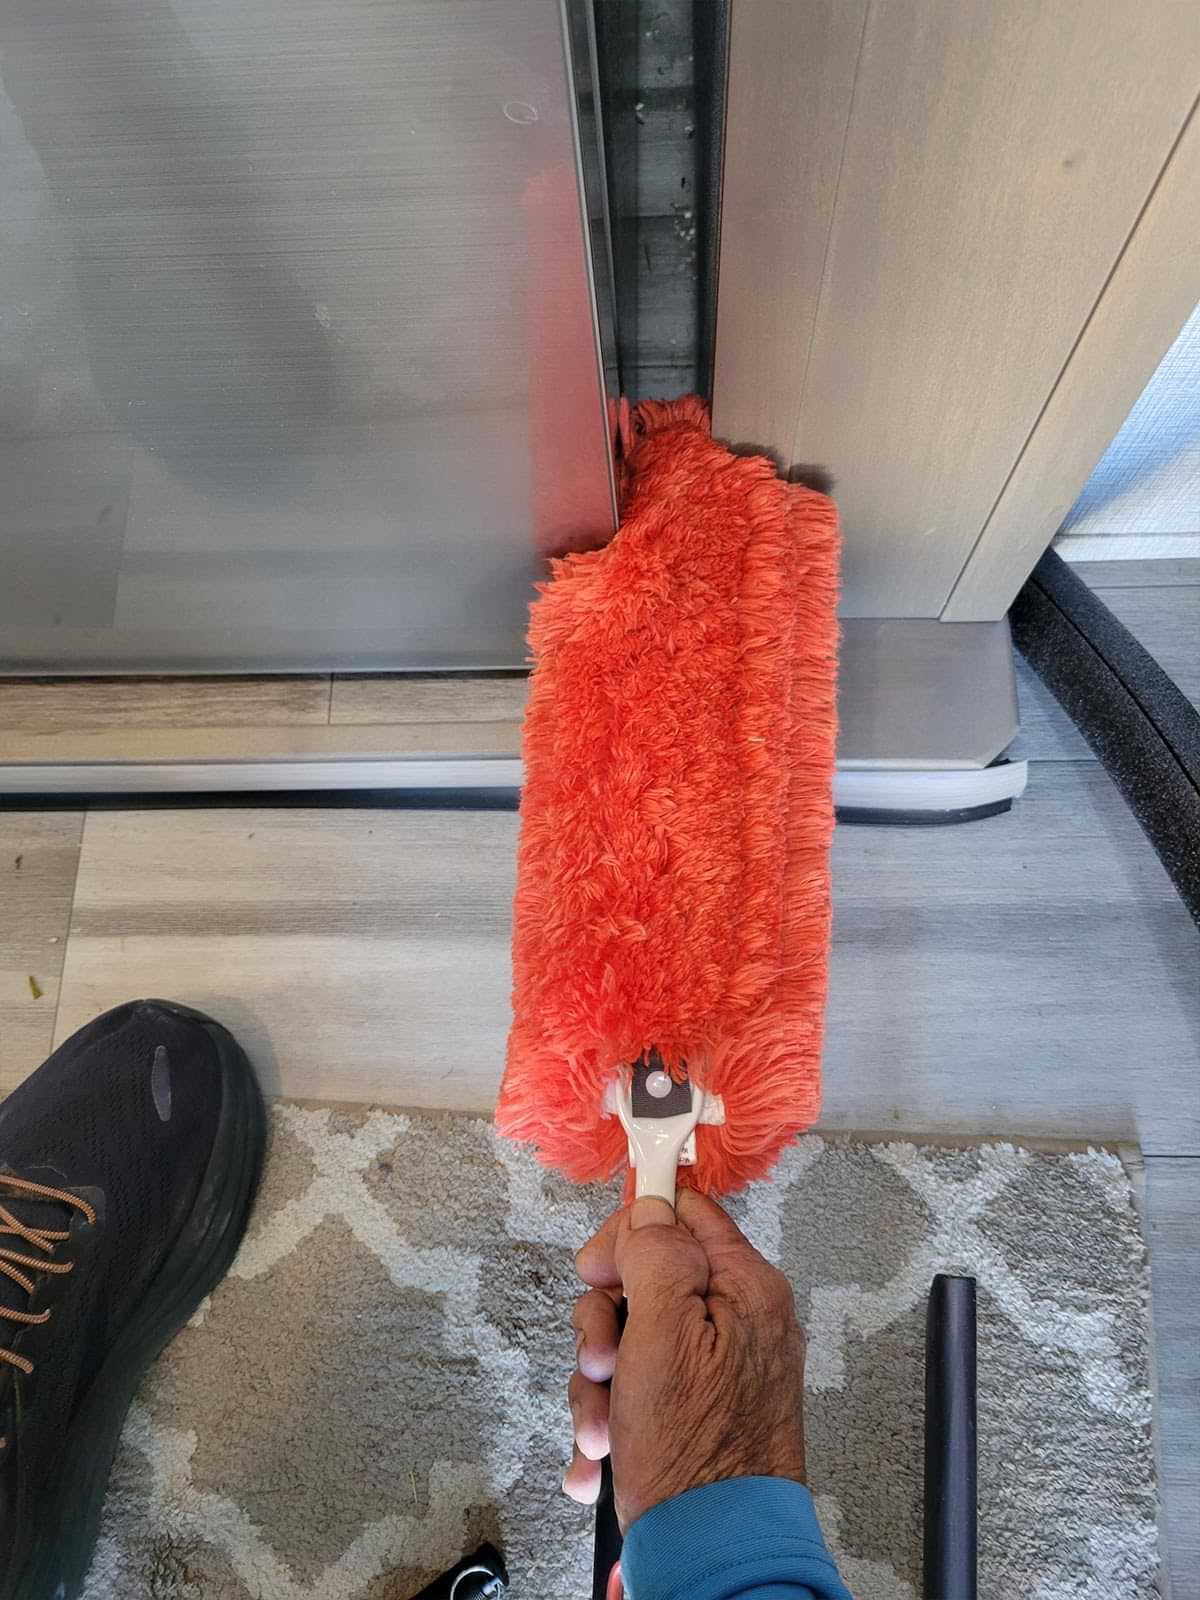 a bright red dusting brush is used to clean the gap to the side of the RV refrigerator but the brush doesn't cover the length of the gap